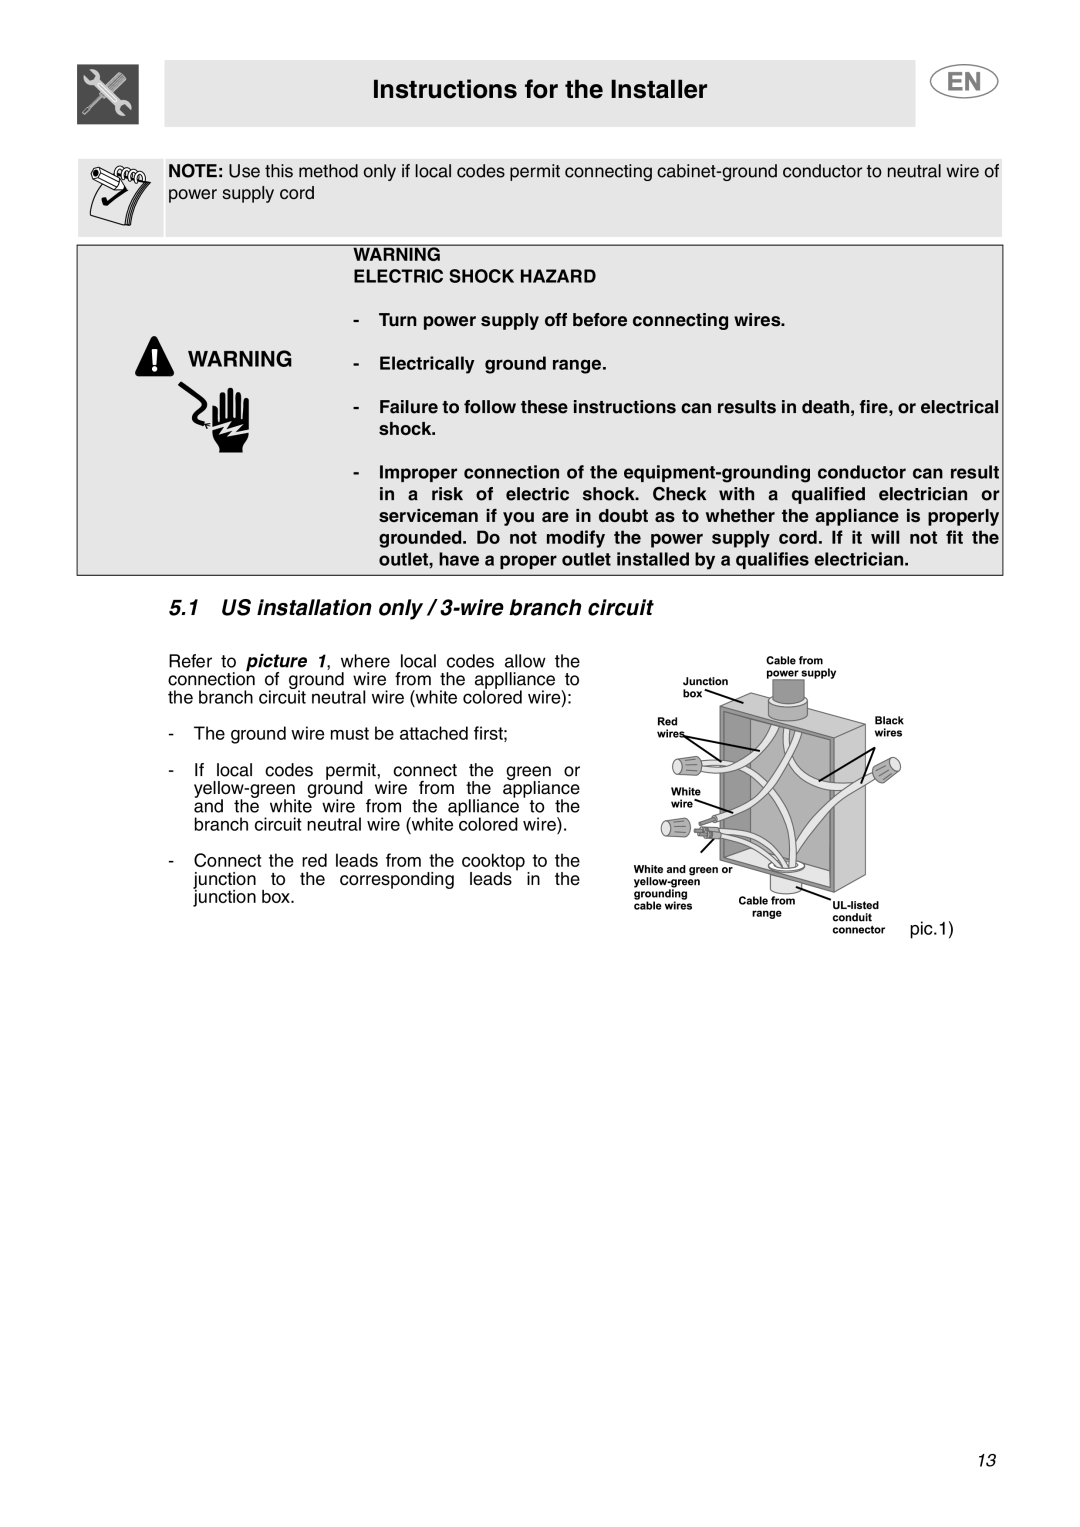 Smeg A1XCU6 important safety instructions 5.1US installation only / 3-wirebranch circuit, Instructions for the Installer 